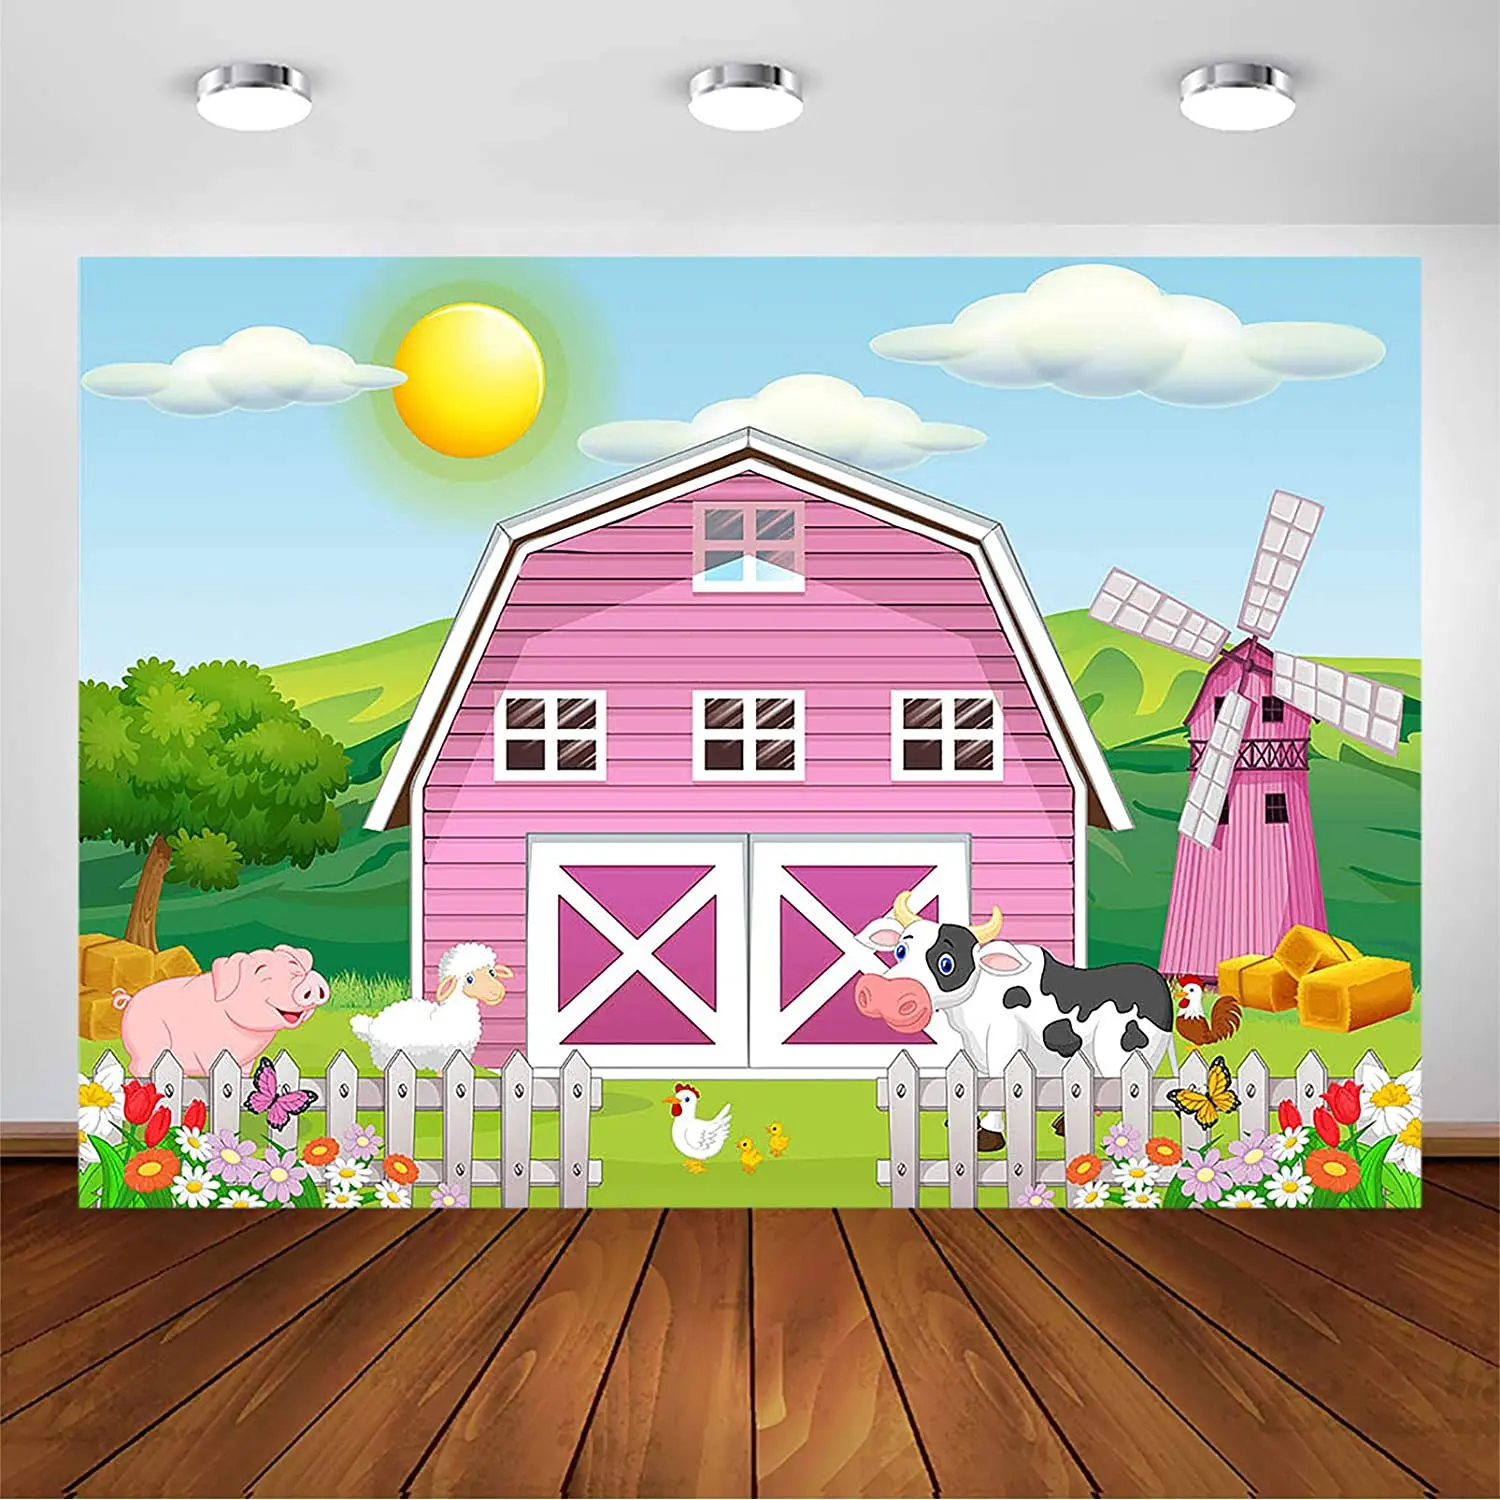 Farm Animals Backdrop for Gils Party Decoration Cartoon Pink Farm Photography Background Kids Children Birthday Baby Shower enlarge